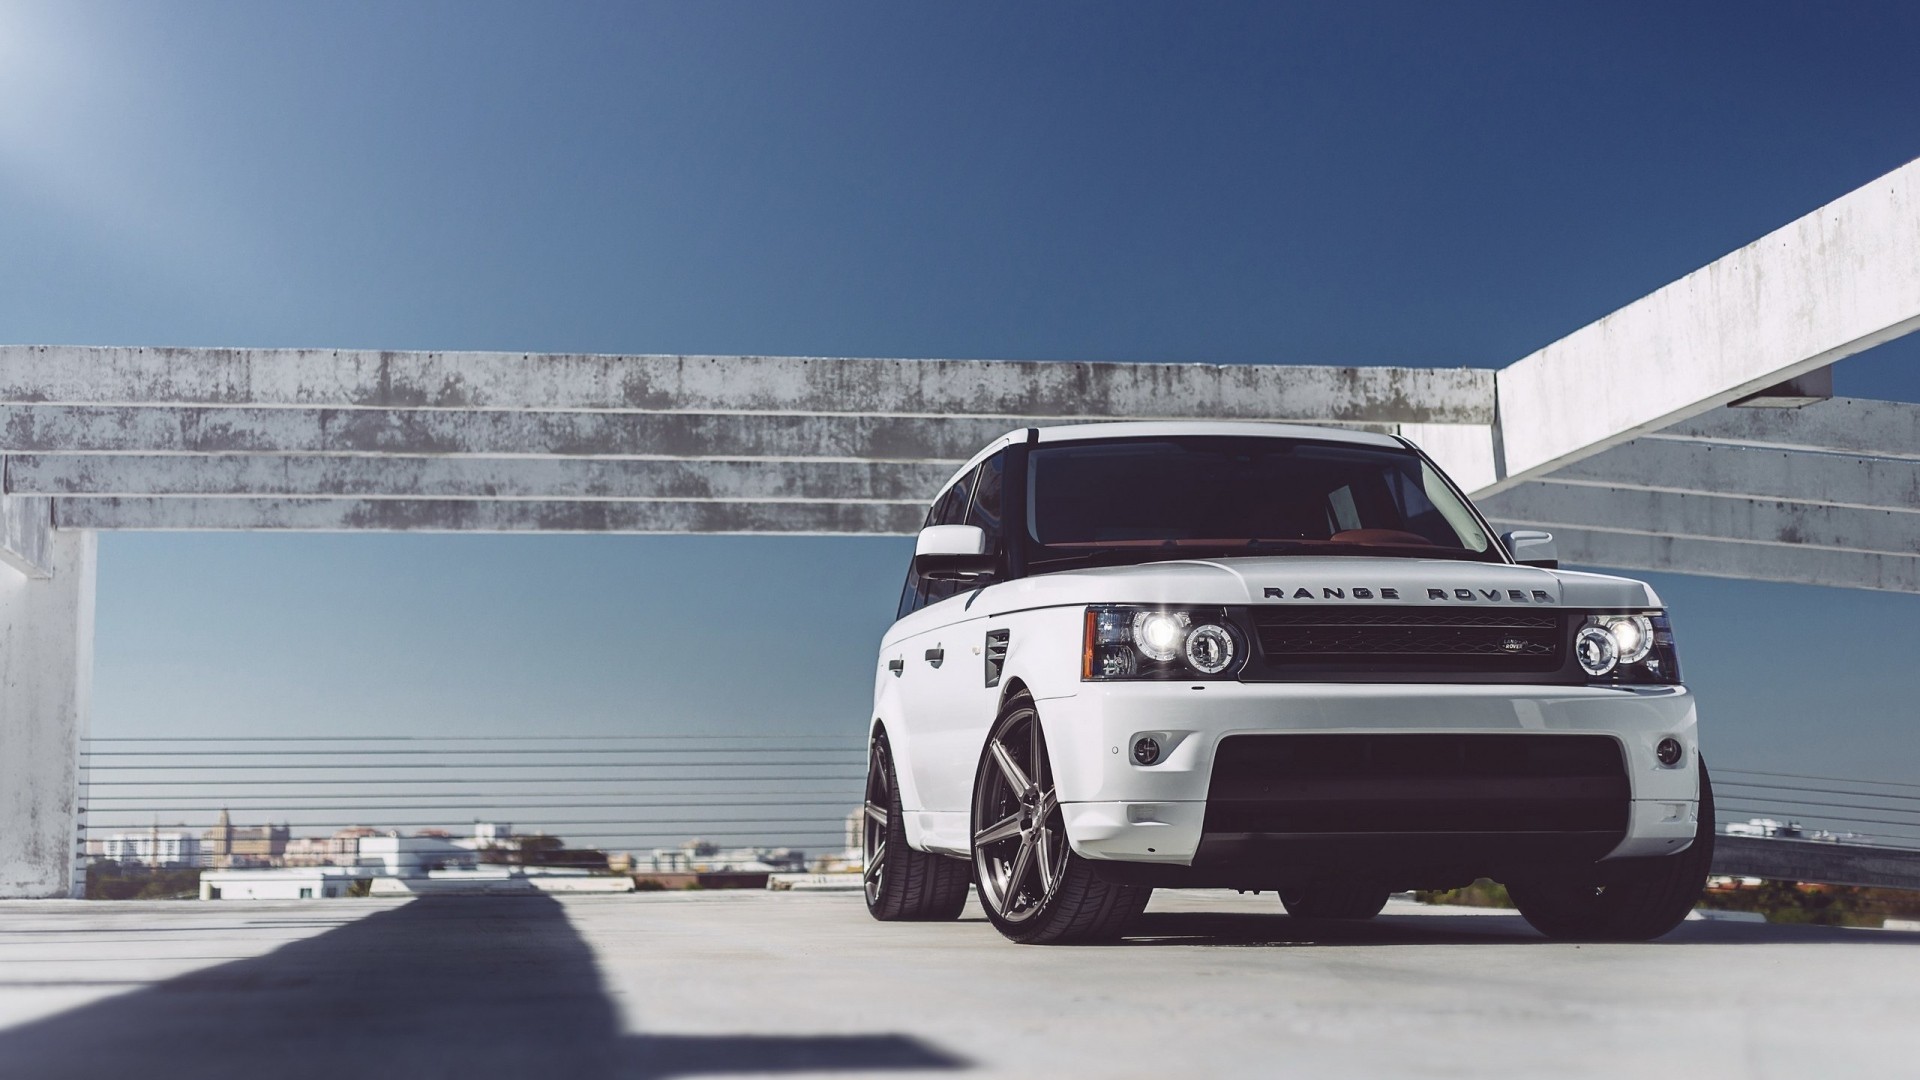 General 1920x1080 car SUV Land Rover Range Rover Sport worm's eye view white cars vehicle British cars